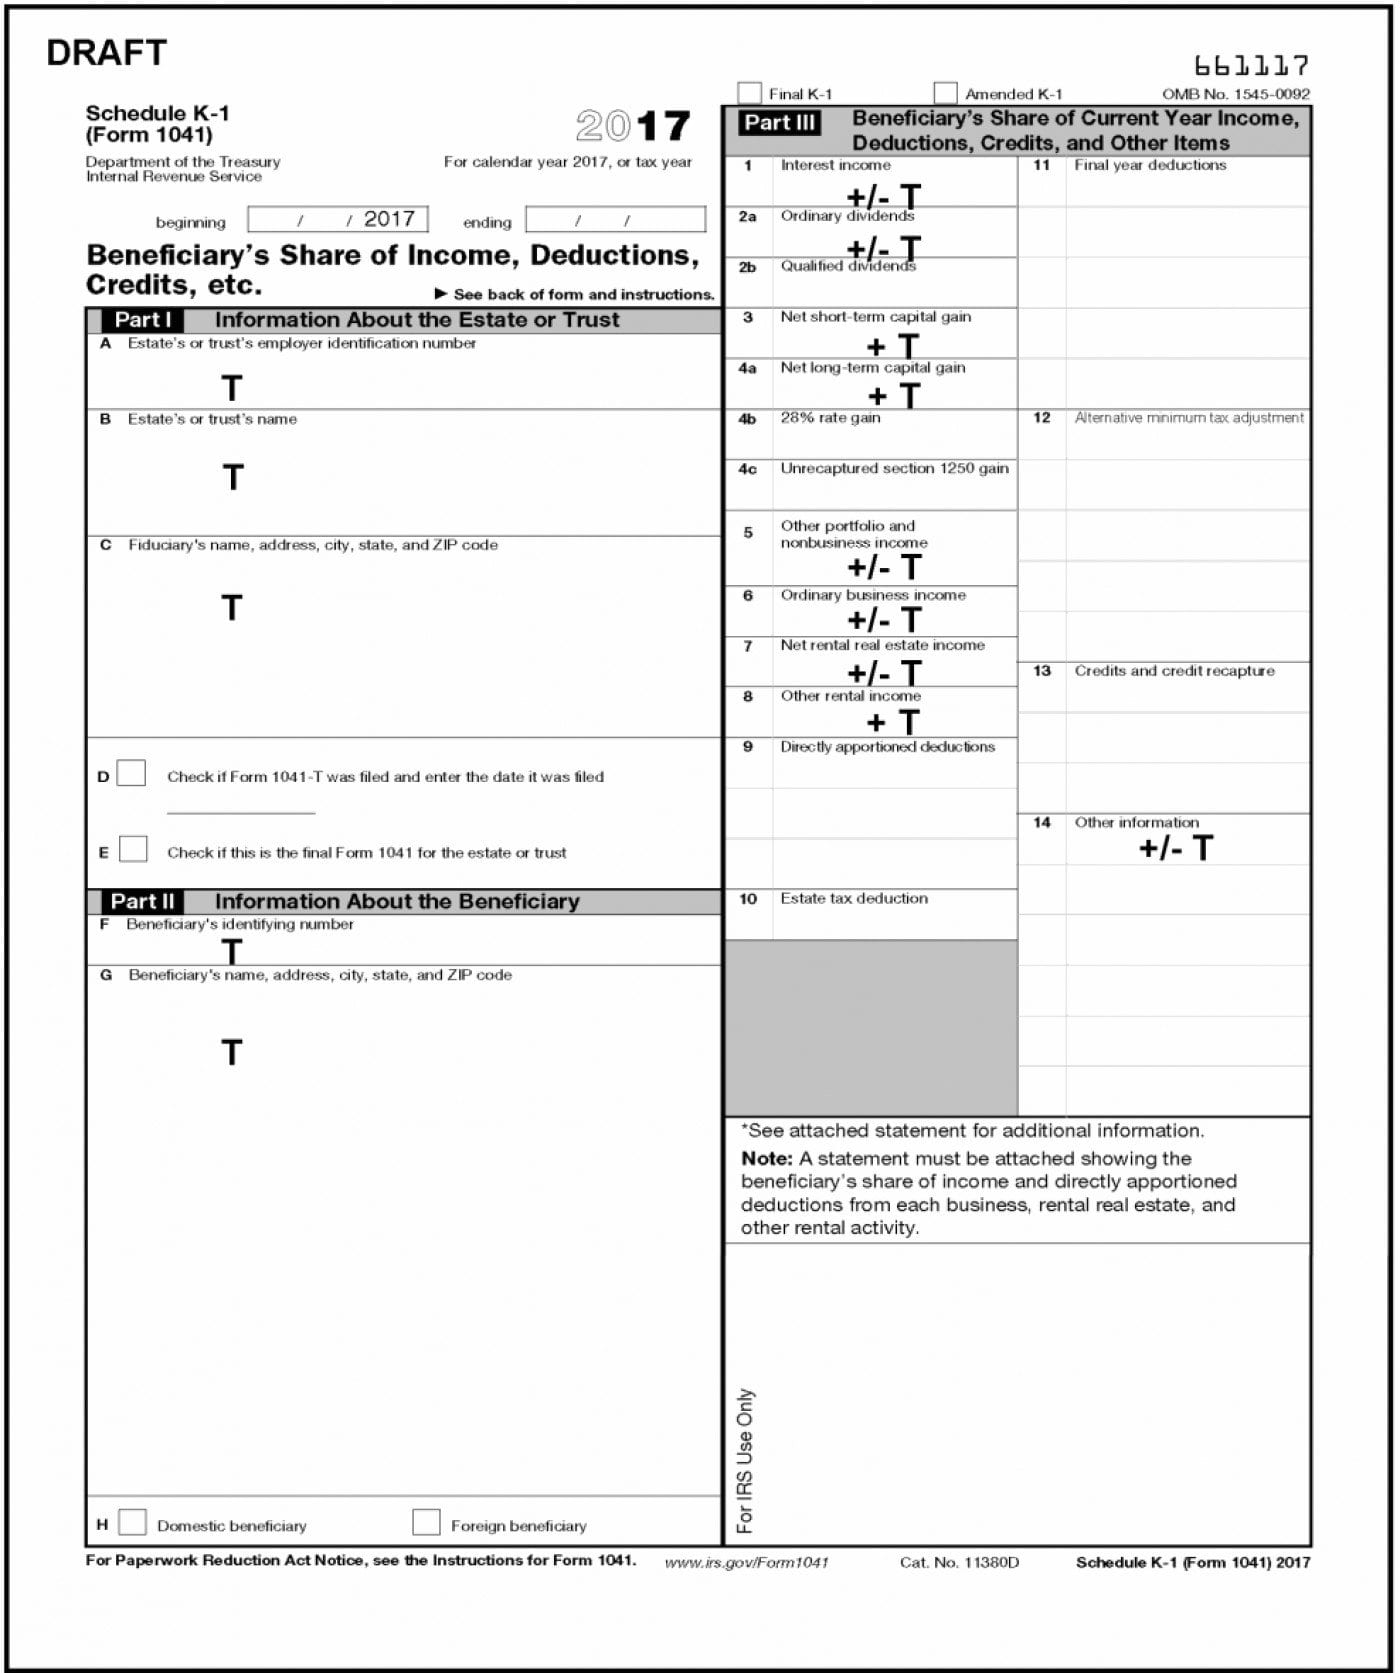 Federal Income Tax Rates For 28 Rate Gain Worksheet 2016 Popular Throughout 28 Rate Gain Worksheet 2016